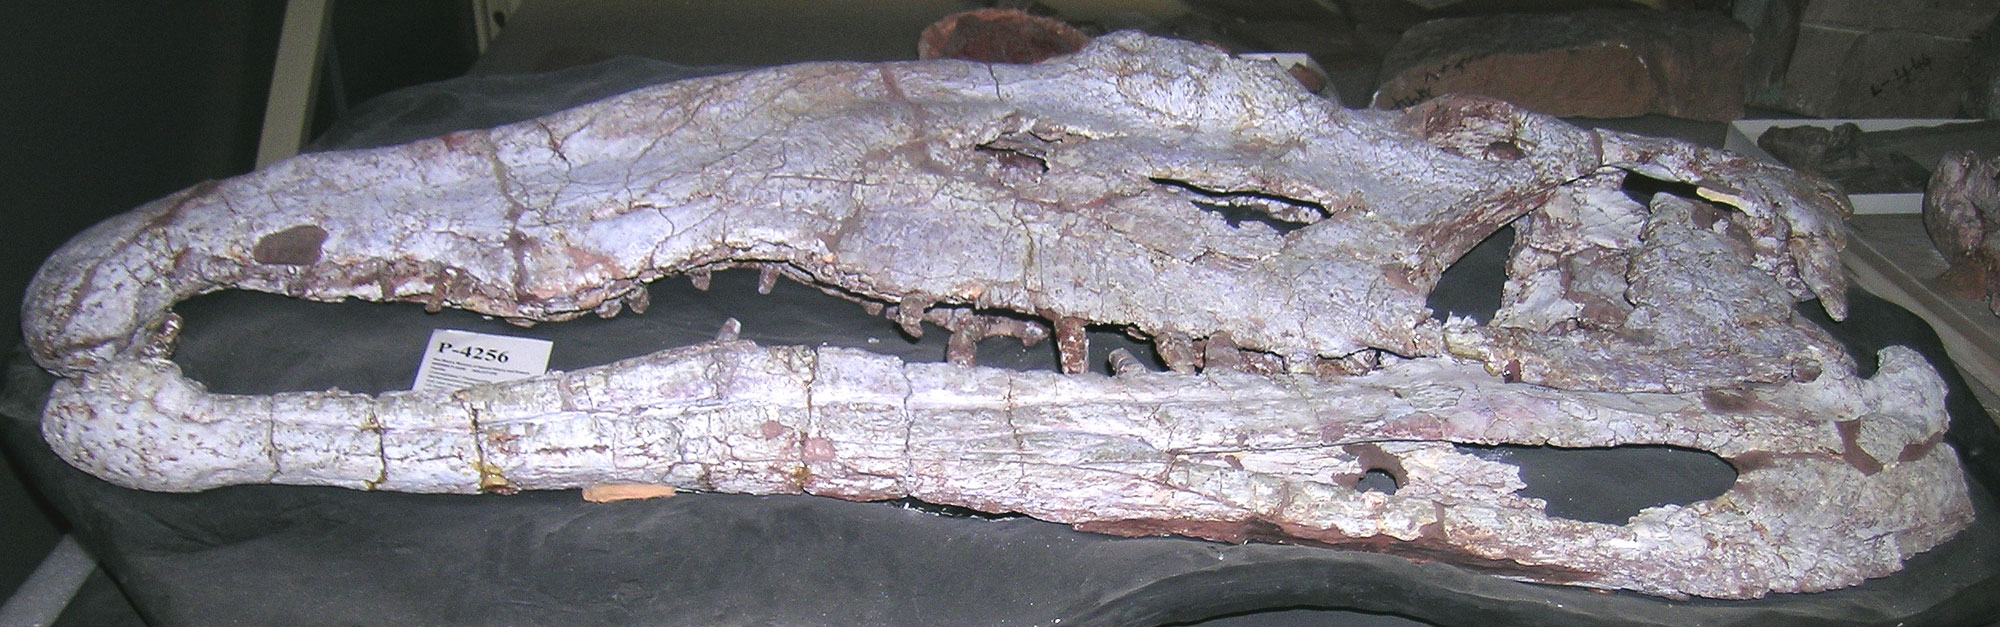 Photograph of the skull of Barrancasuchus sealeyi, a crocodile-like reptile from the Triassic of eastern New Mexico.